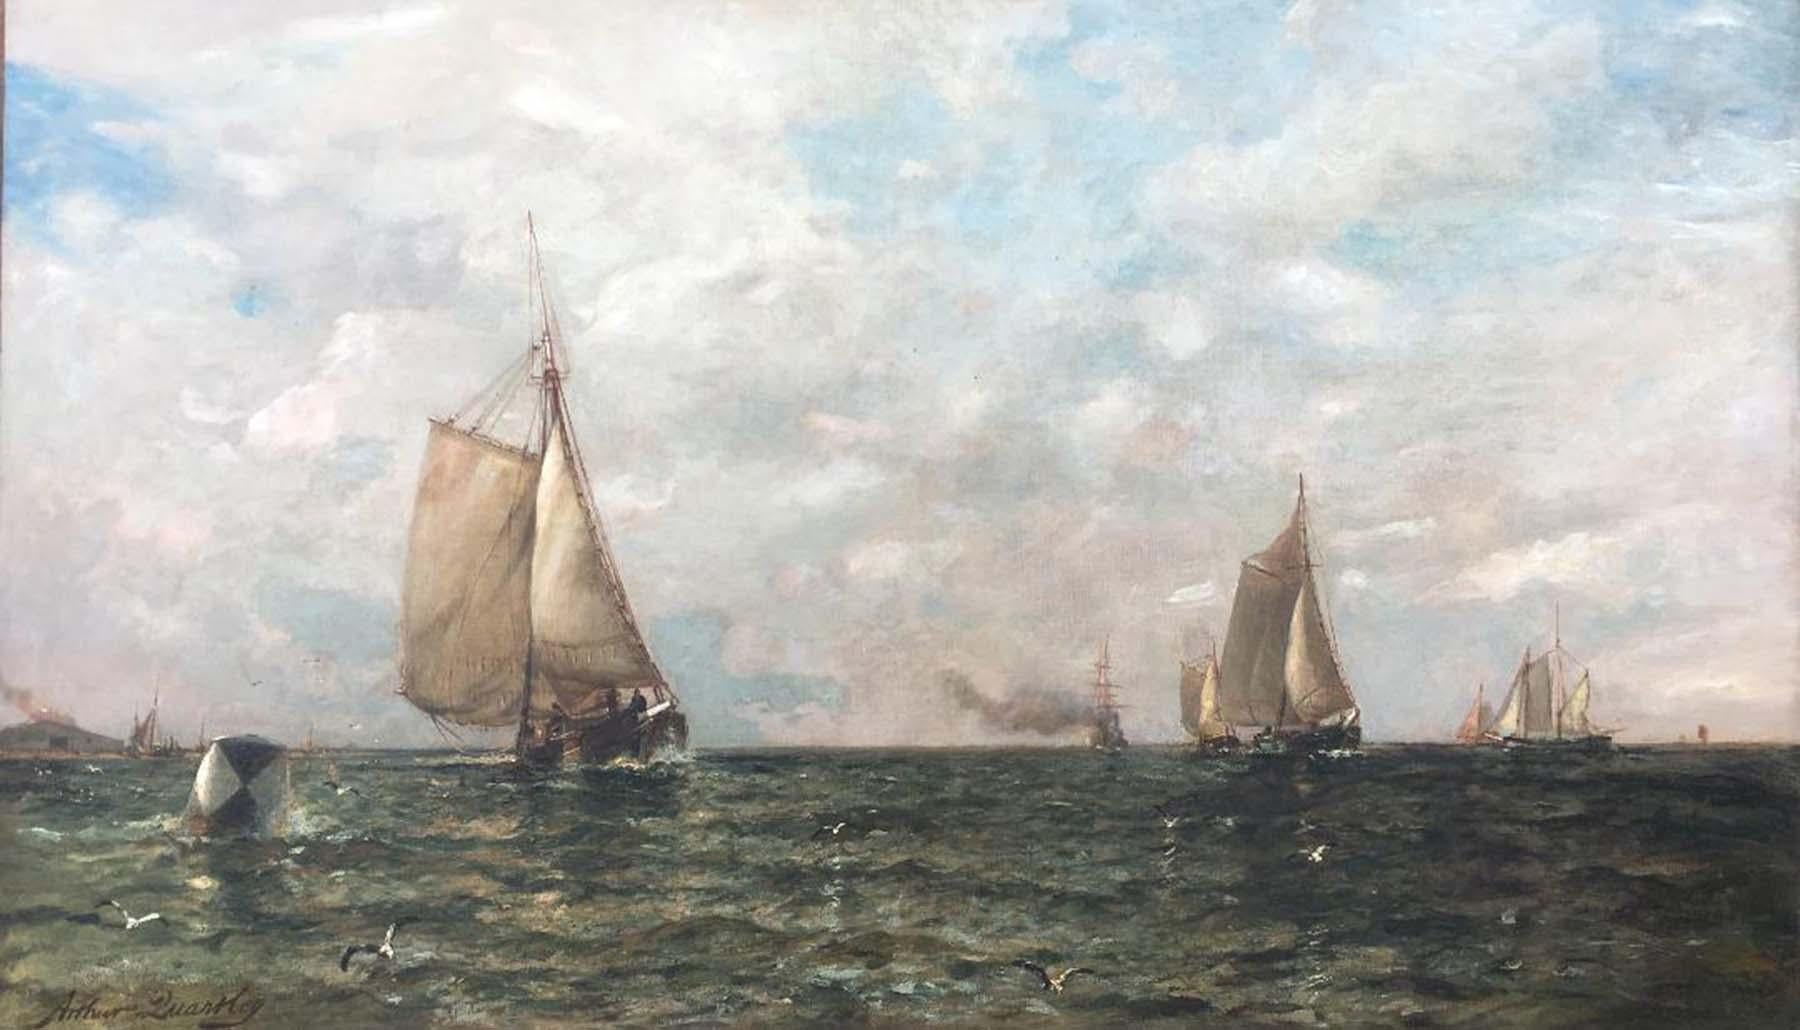 Coming into Harbor, Long Island - Painting by Arthur Quartley